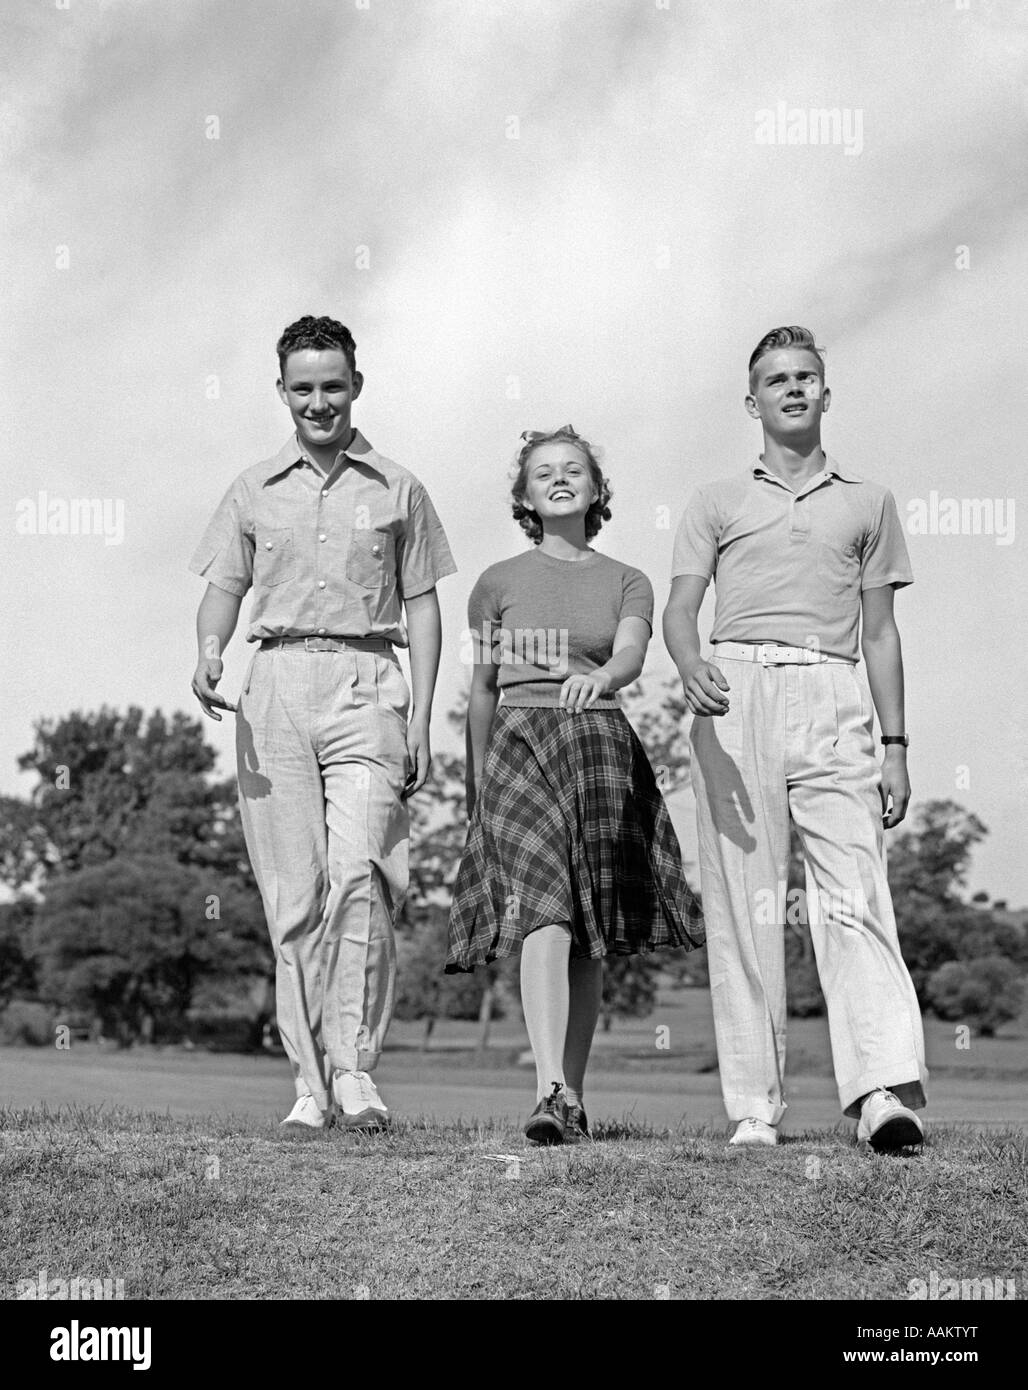 1930s 1940s TWO TEEN BOYS ONE GIRL WALKING CONFIDENTLY IN GRASSY MEADOW CASUAL DRESS Stock Photo